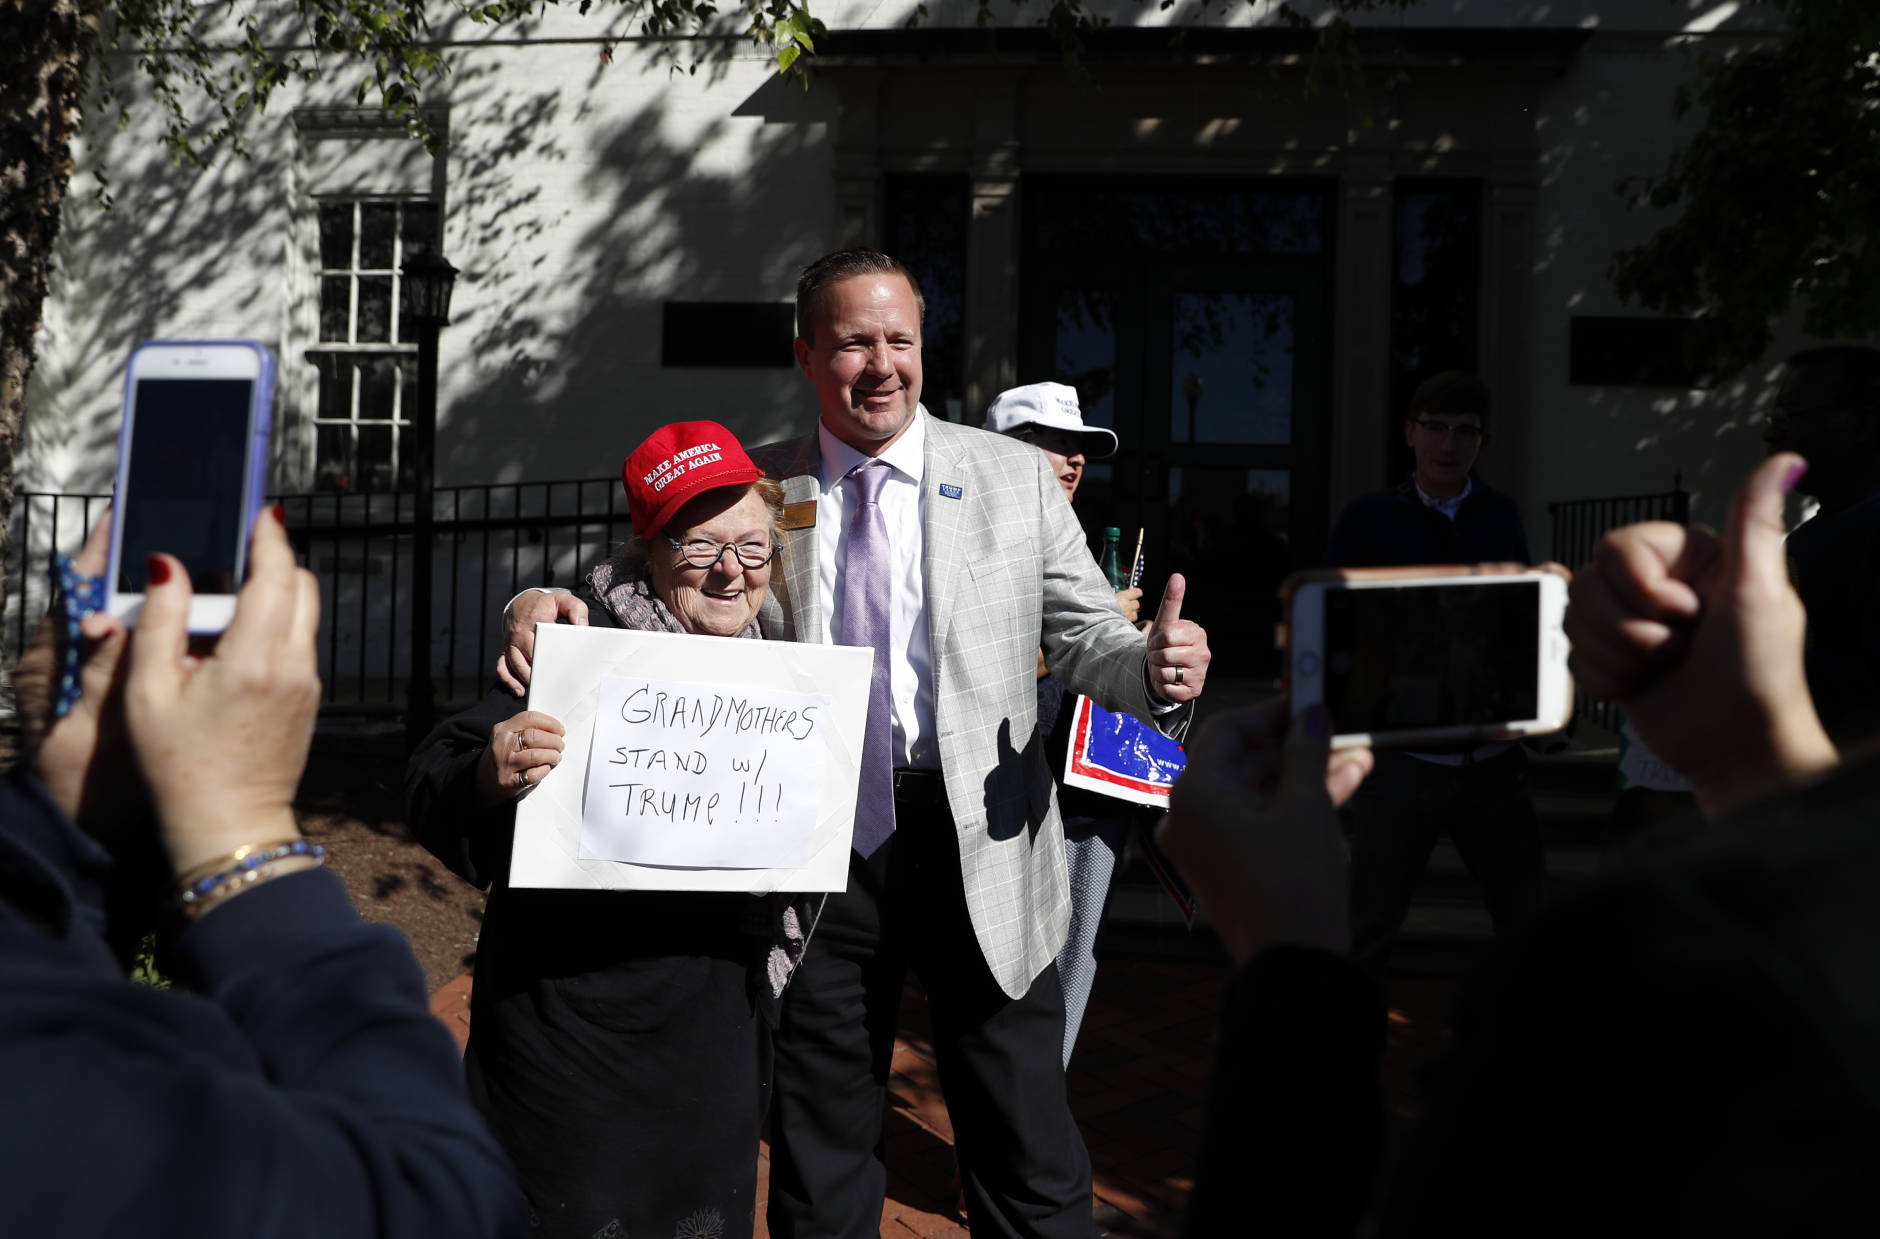 Corey Stewart, chairman of Republican presidential candidate Donald Trump's Virginia campaign, right, gives the thumbs-up as he poses for a photo with Trump supporter Heidi Saba with her sign that reads "Grandmothers Stand w/Trump!!!" outside the Republican National Committee Headquarters in Washington, Monday, Oct. 10, 2016. Stewart and Virginia Women for Trump gathered in support of Trump.  (AP Photo/Carolyn Kaster)